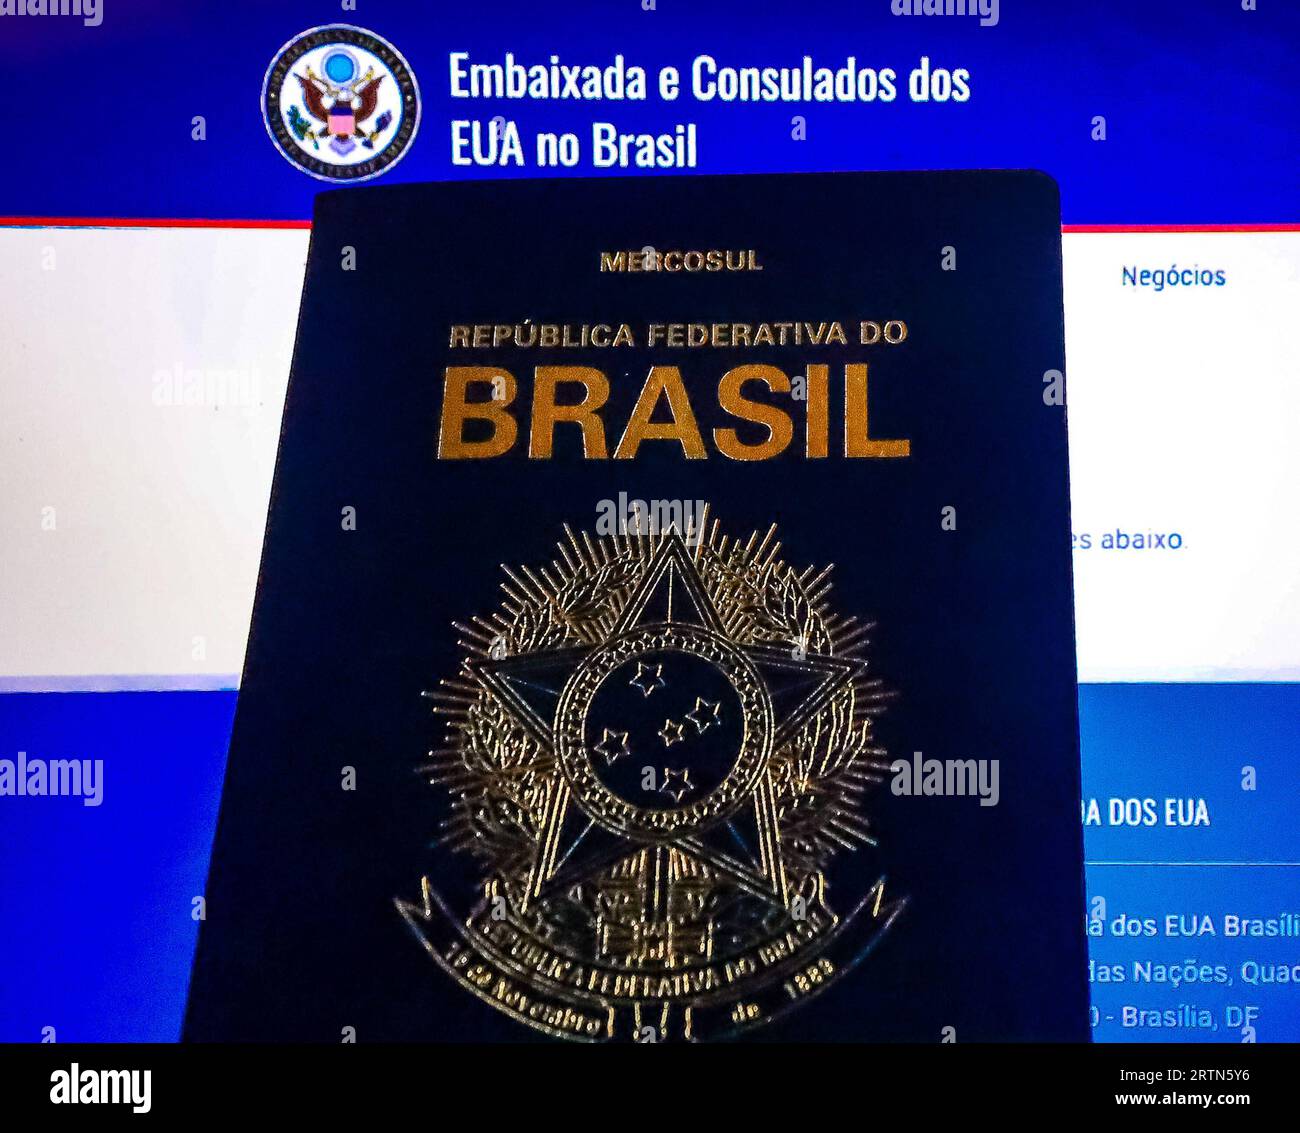 RECORD DATE NOT STATED Sao Paulo SP, 09/13/2023 -Loss/Automatic/Citizenship/Brazilian Sao Paulo SP, 09/13/2023 -Loss/Automatic/Citizenship/Brazilian - The Chamber of Deputies approved on Tuesday 12 the Proposed Amendment to the Constitution PEC 16/21, which ends the loss automatic granting of Brazilian nationality to anyone who obtains another nationality and will be restricted when there is an express request from the citizen, or in situations when the person does not have their nationality recognized by any other country. This Wednesday13.Photo: Gabriel Silva/Ato Press Sao Paulo SP, 09/13/20 Stock Photo